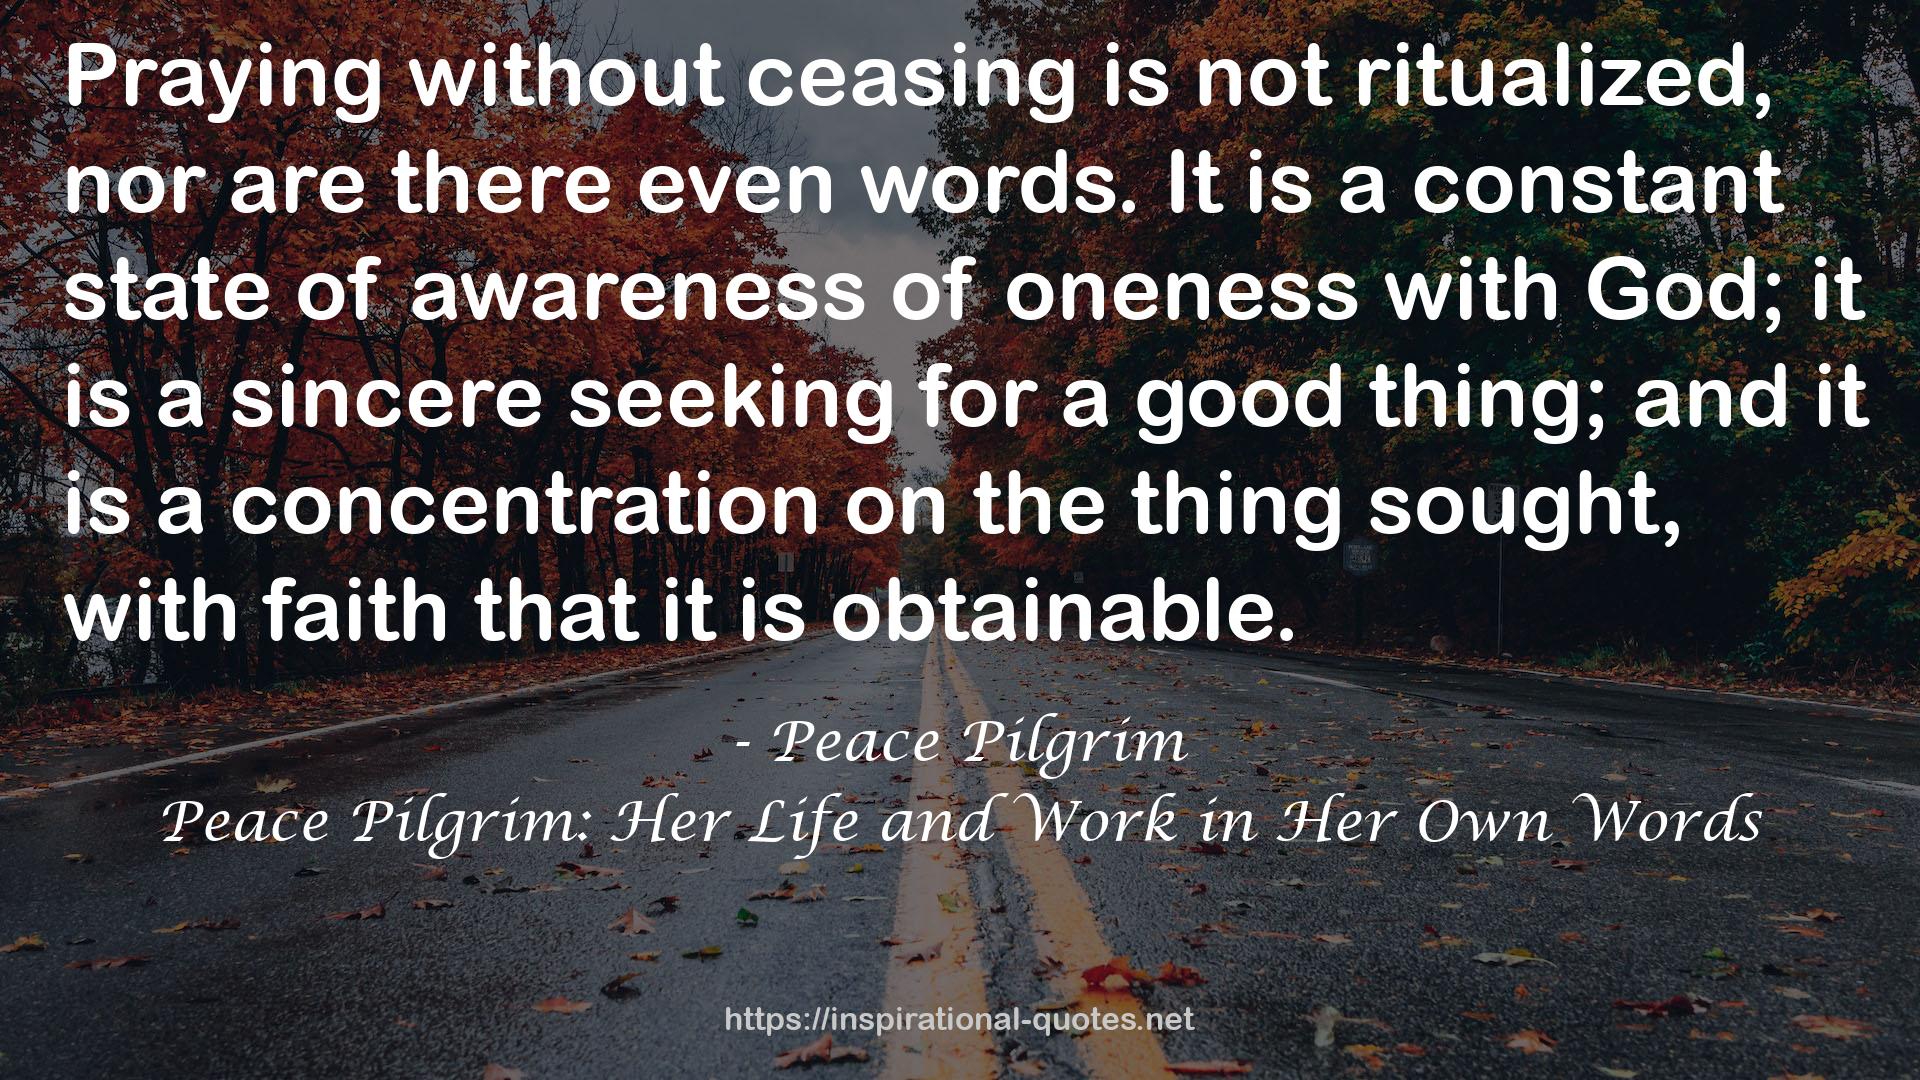 Peace Pilgrim: Her Life and Work in Her Own Words QUOTES